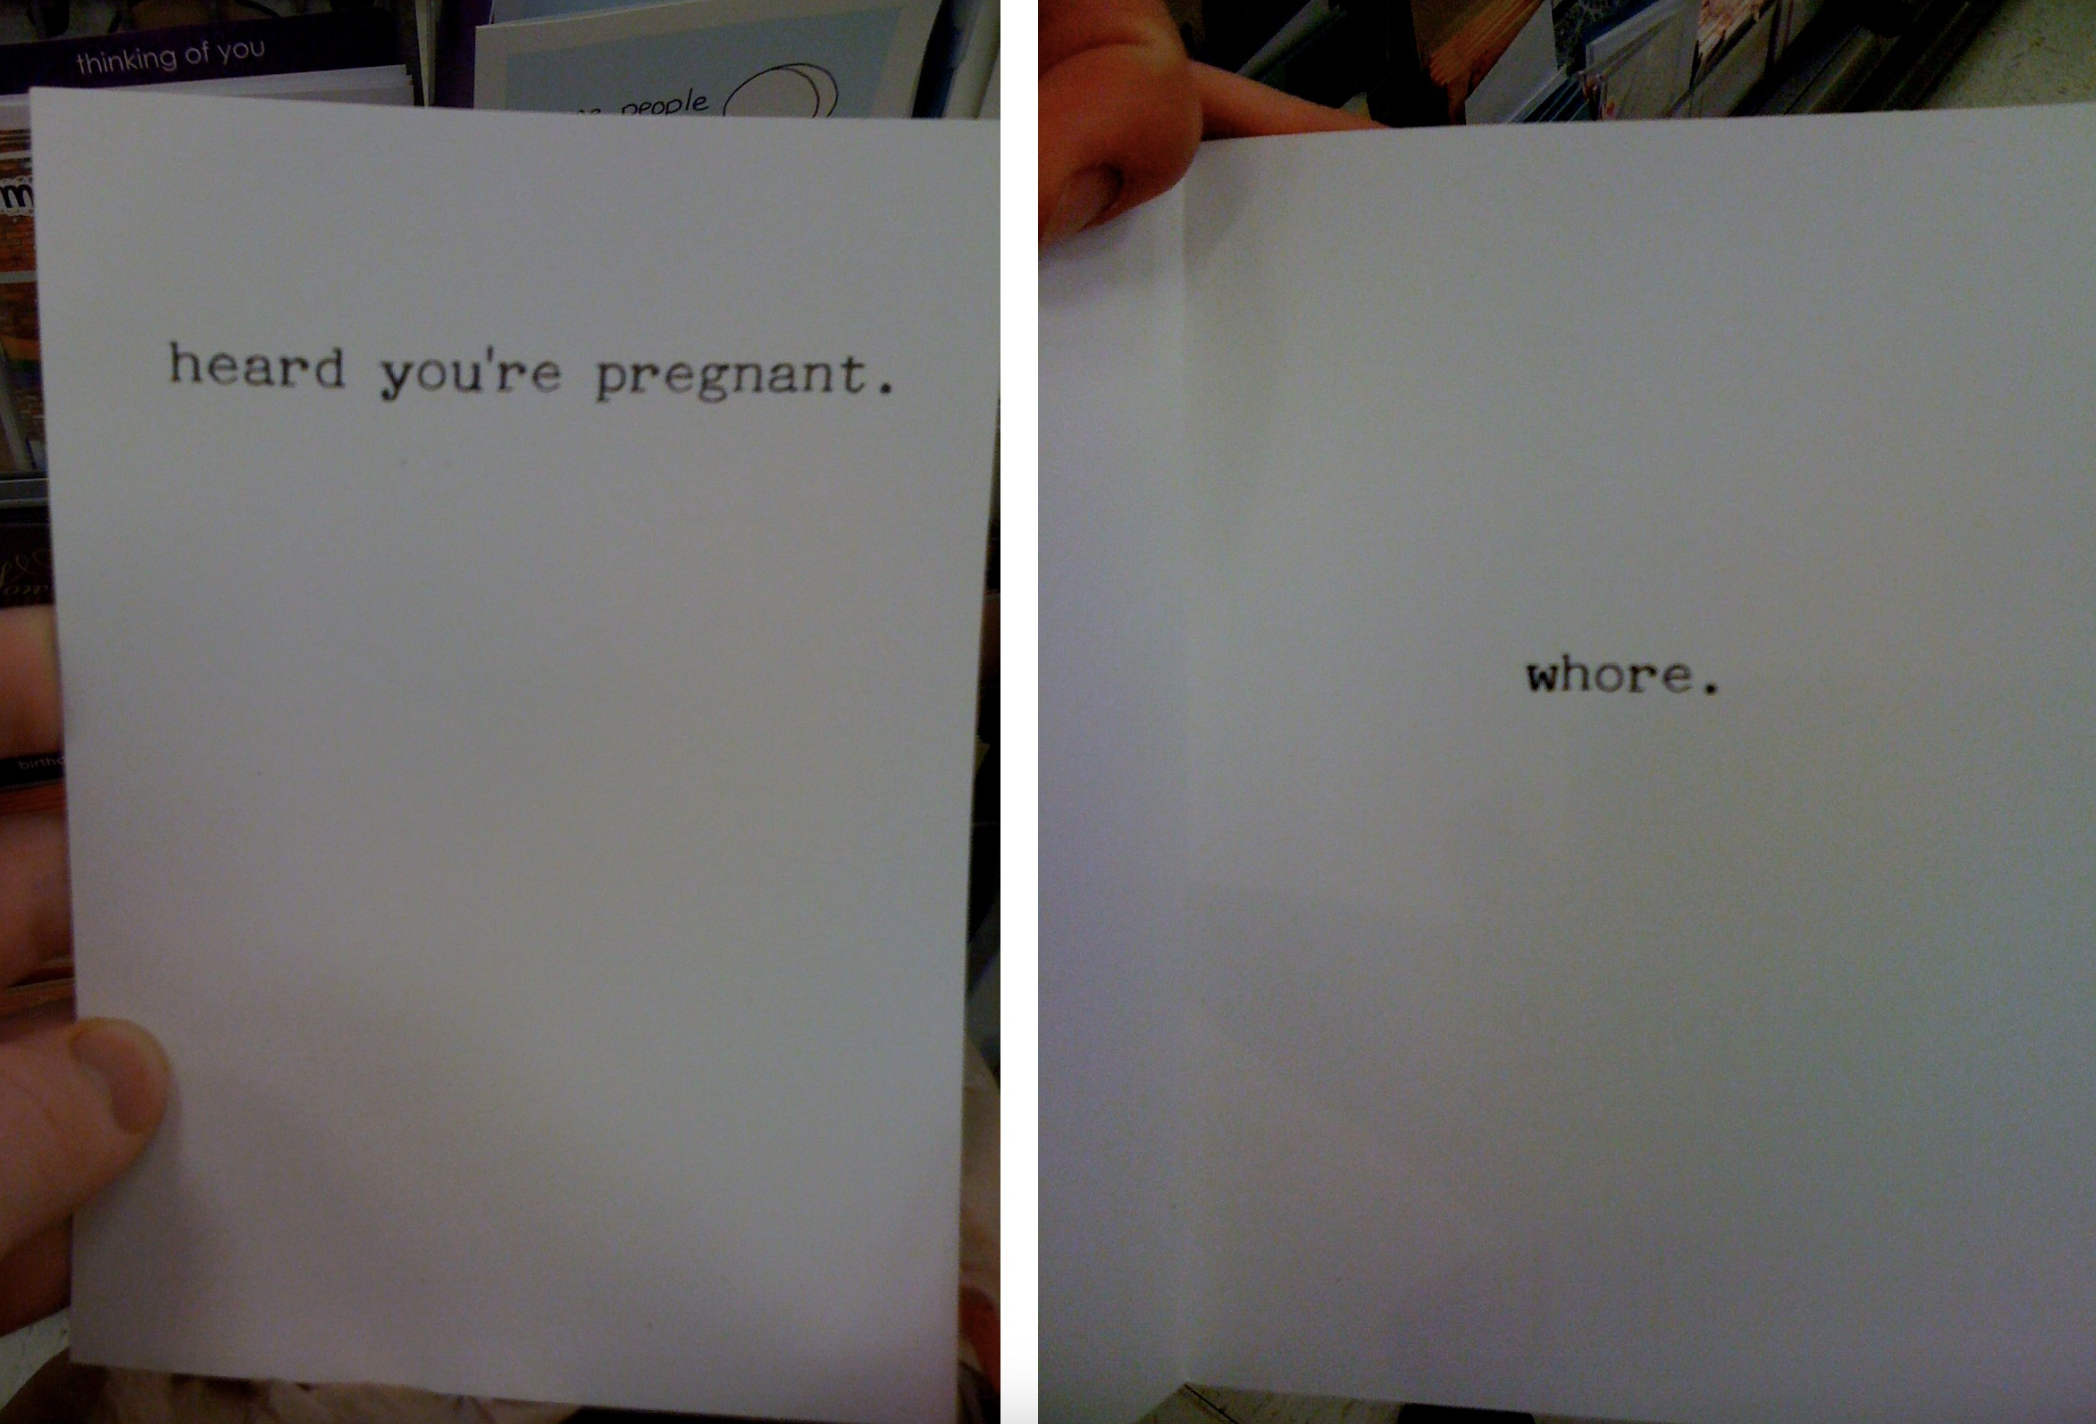 Card message: &quot;heard you&#x27;re pregnant&quot; and &quot;whore&quot;